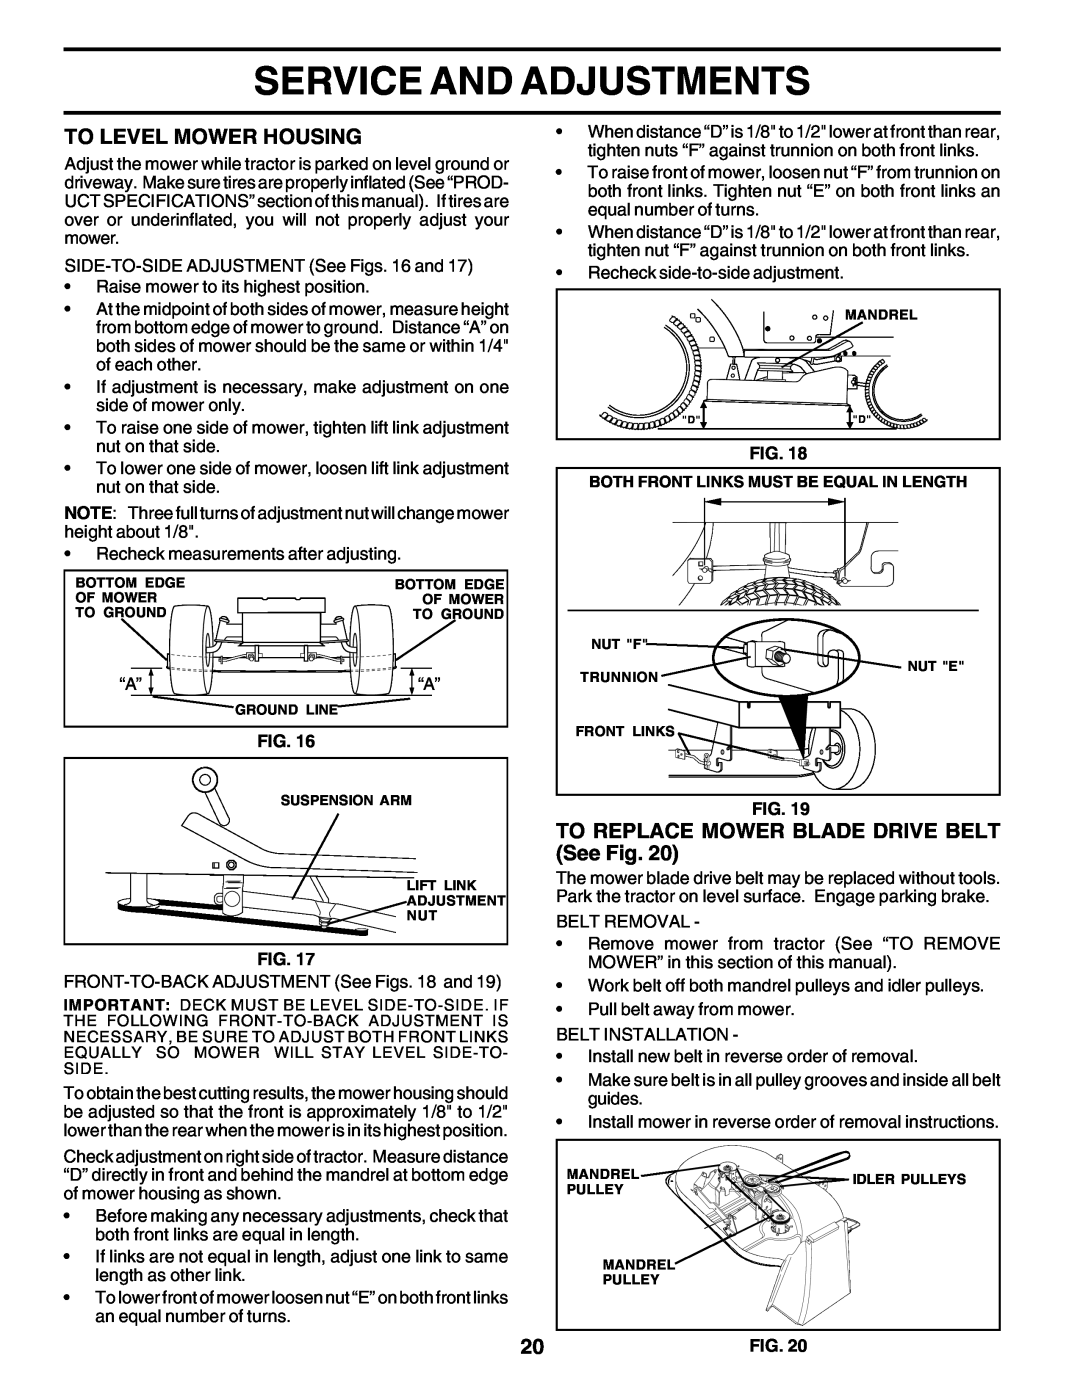 Weed Eater WE12538J manual Service And Adjustments, To Level Mower Housing, TO REPLACE MOWER BLADE DRIVE BELT See Fig 